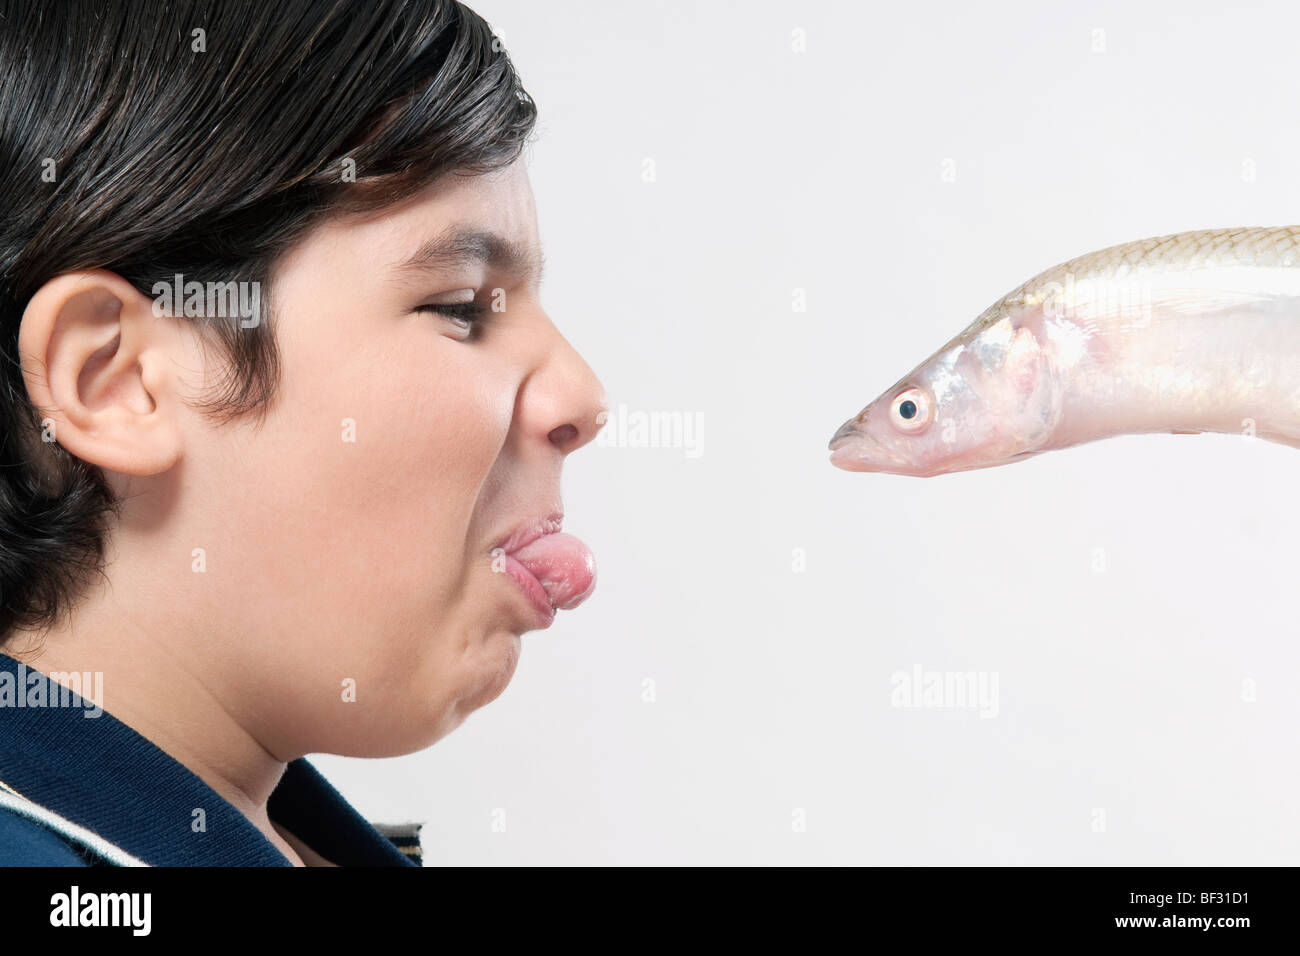 Boy facing a fish and making a disgust face Stock Photo